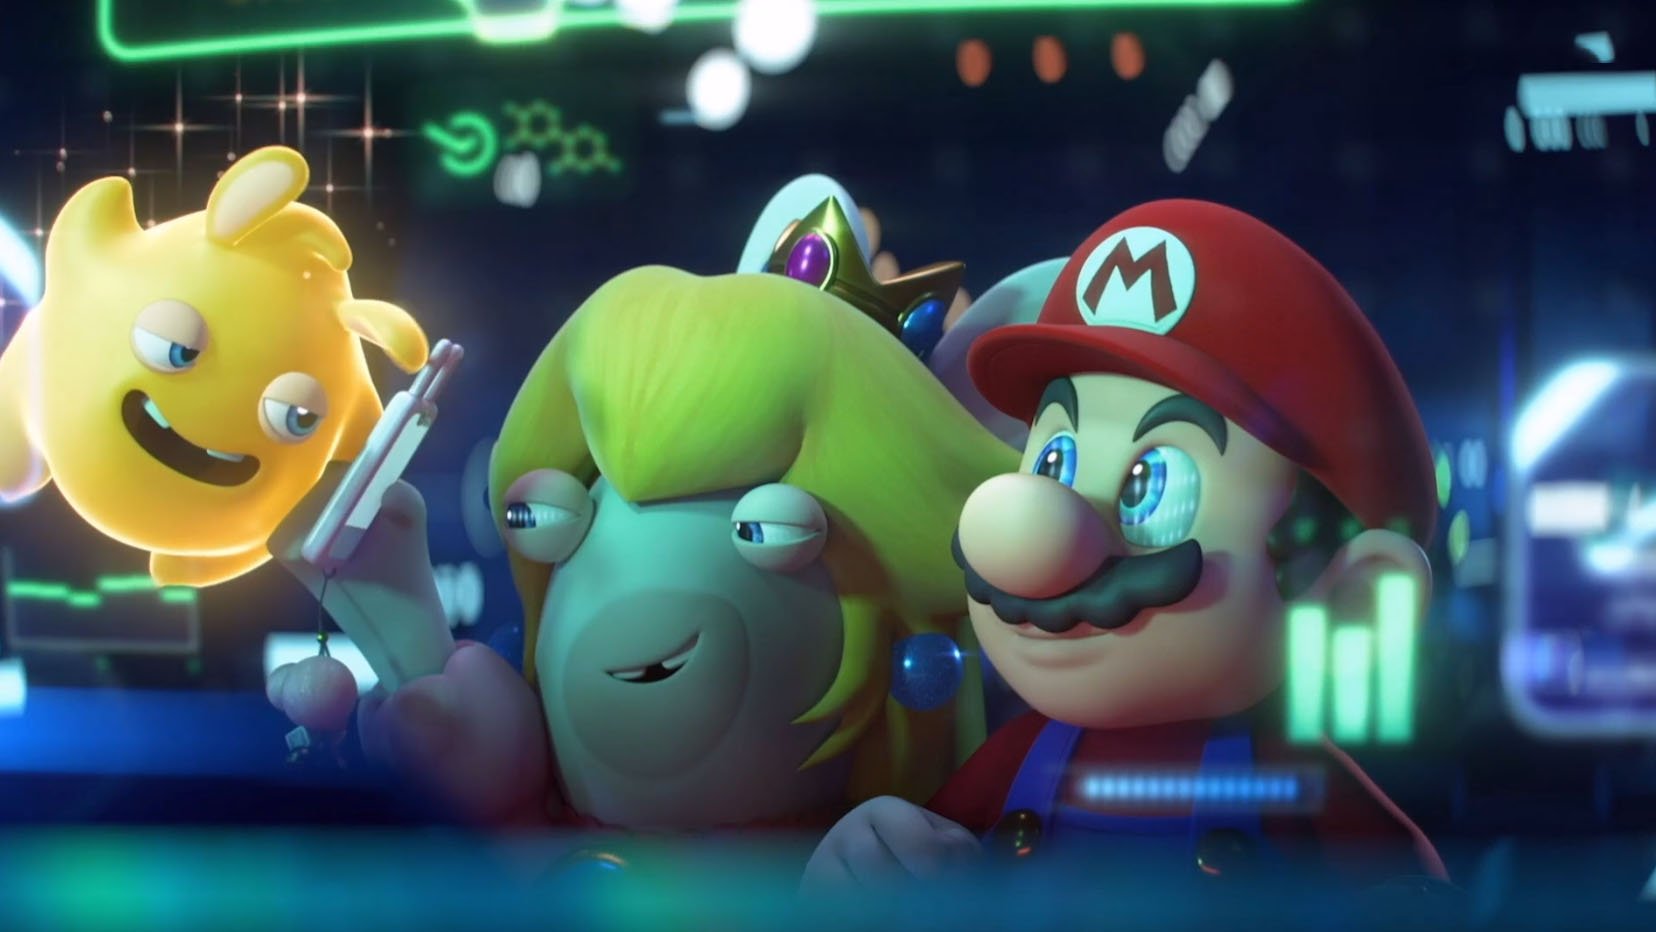 E Mario Rabbids Sparks Of Hope Leaked With Bowser And Rosalina As New Characters Imore